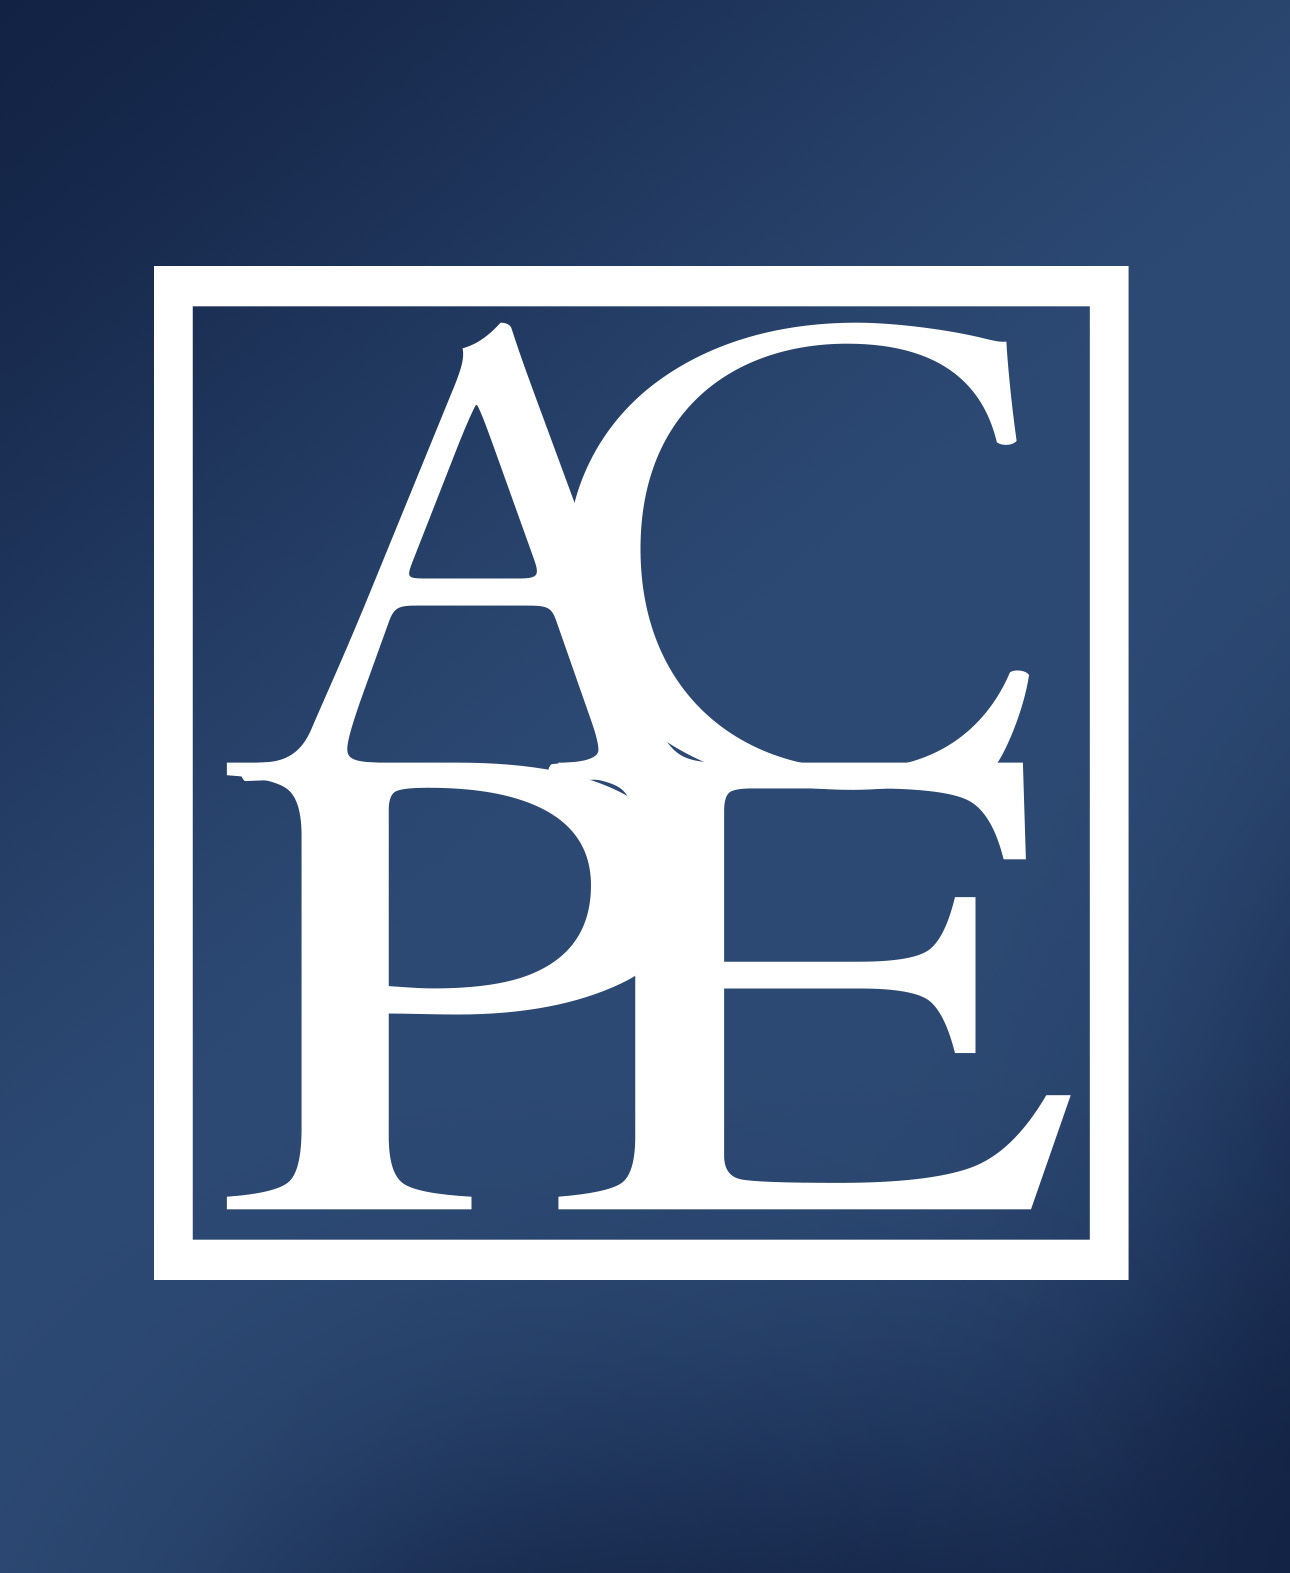 Accreditation Council for Pharmacy Education (ACPE) Certification on